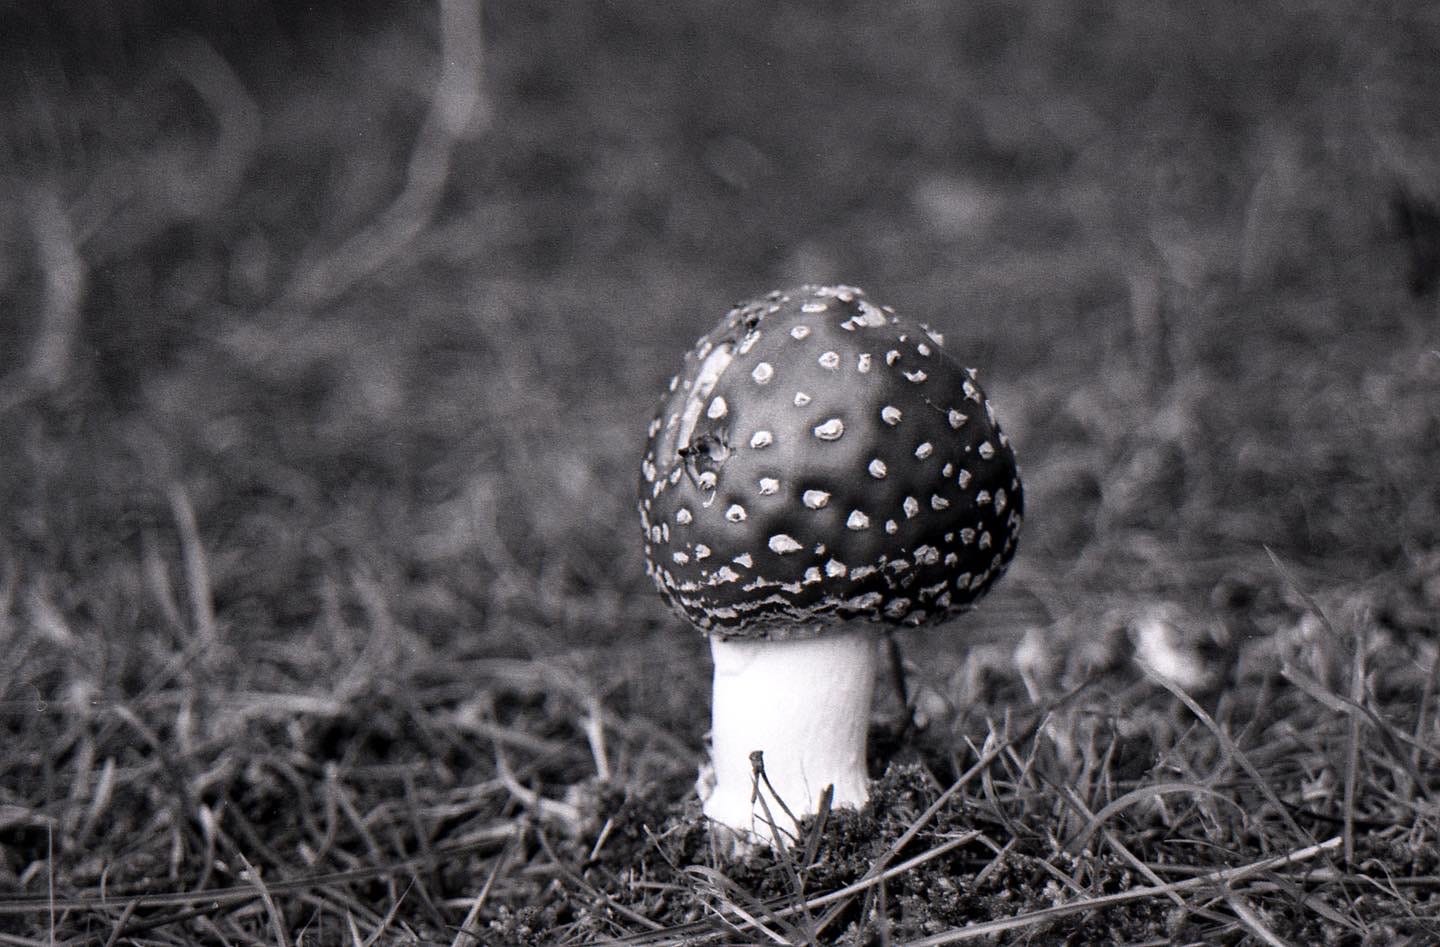 Black and white photograph of a stumpy amanita mushroom in the undergrowth.